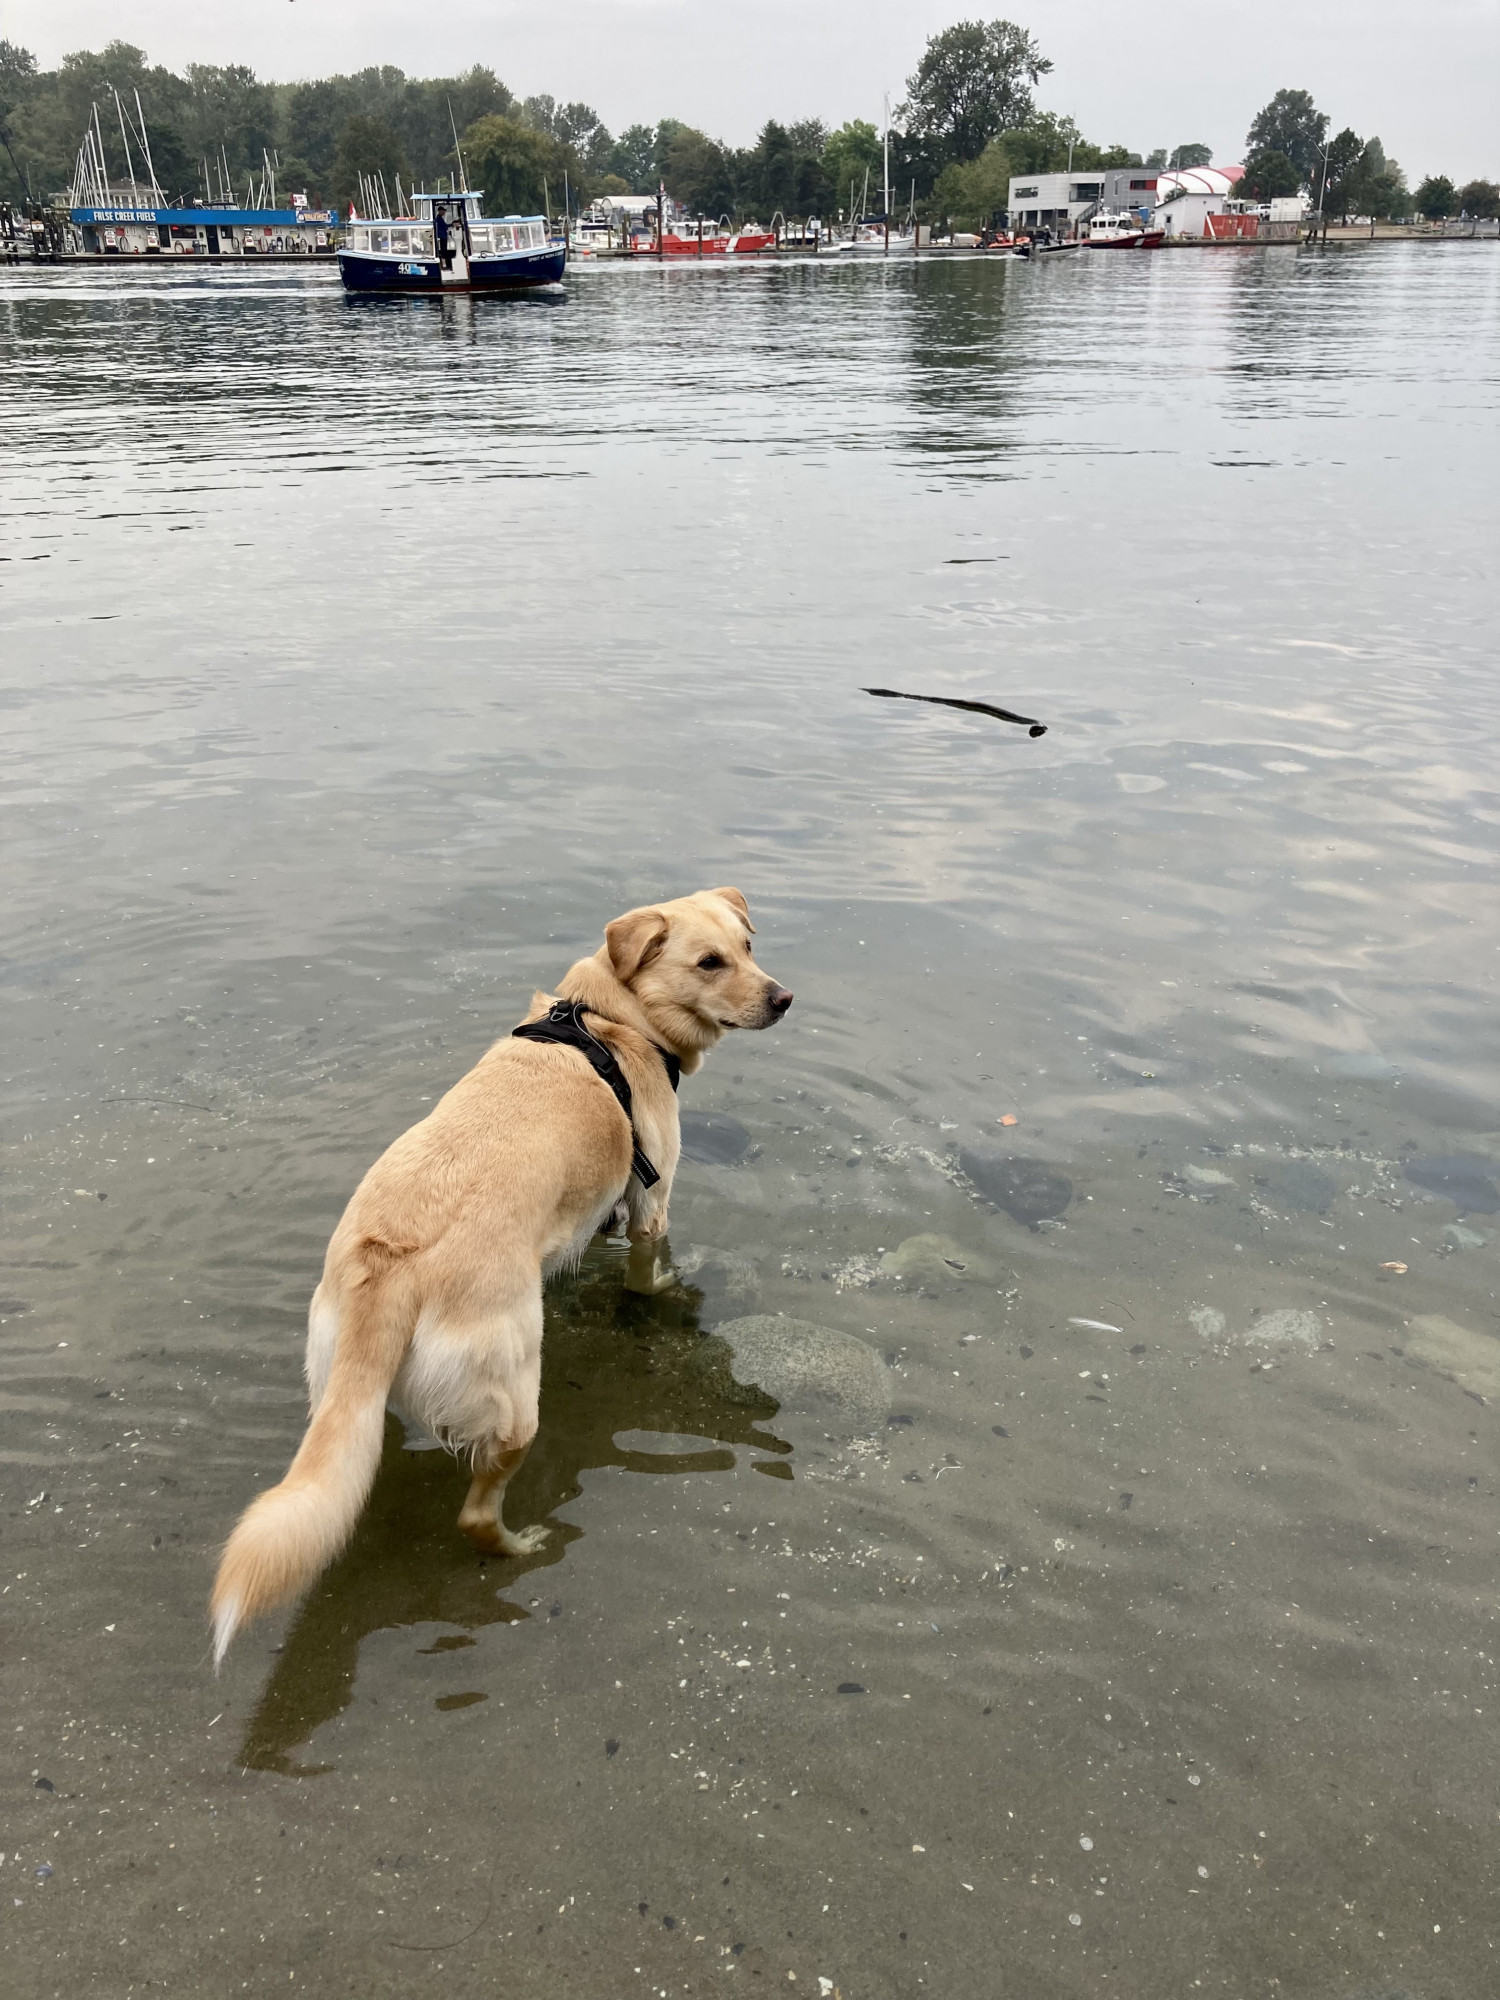 A golden retriever looks for someone to help retrieve a stick that has floated away in the water, further out than the dog wants to swim